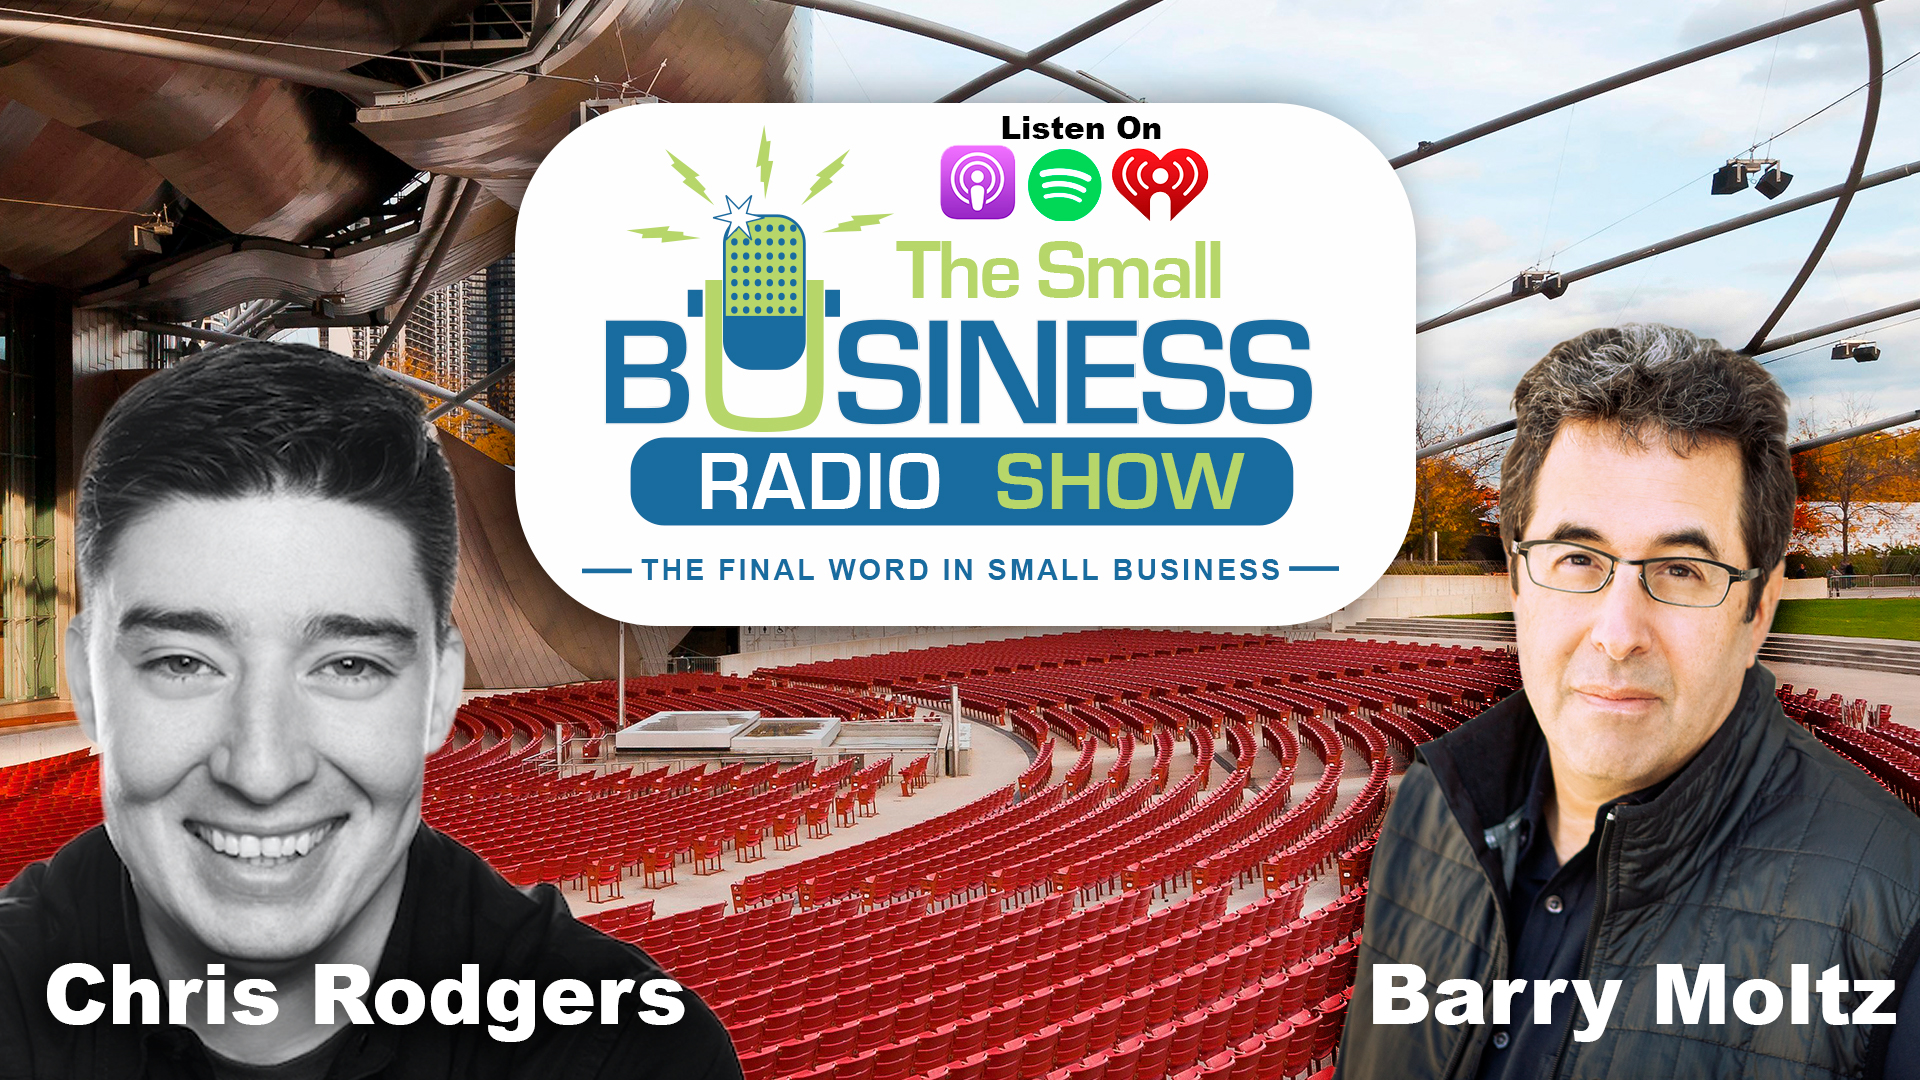 Chris Rodgers on The Small Business Radio Show